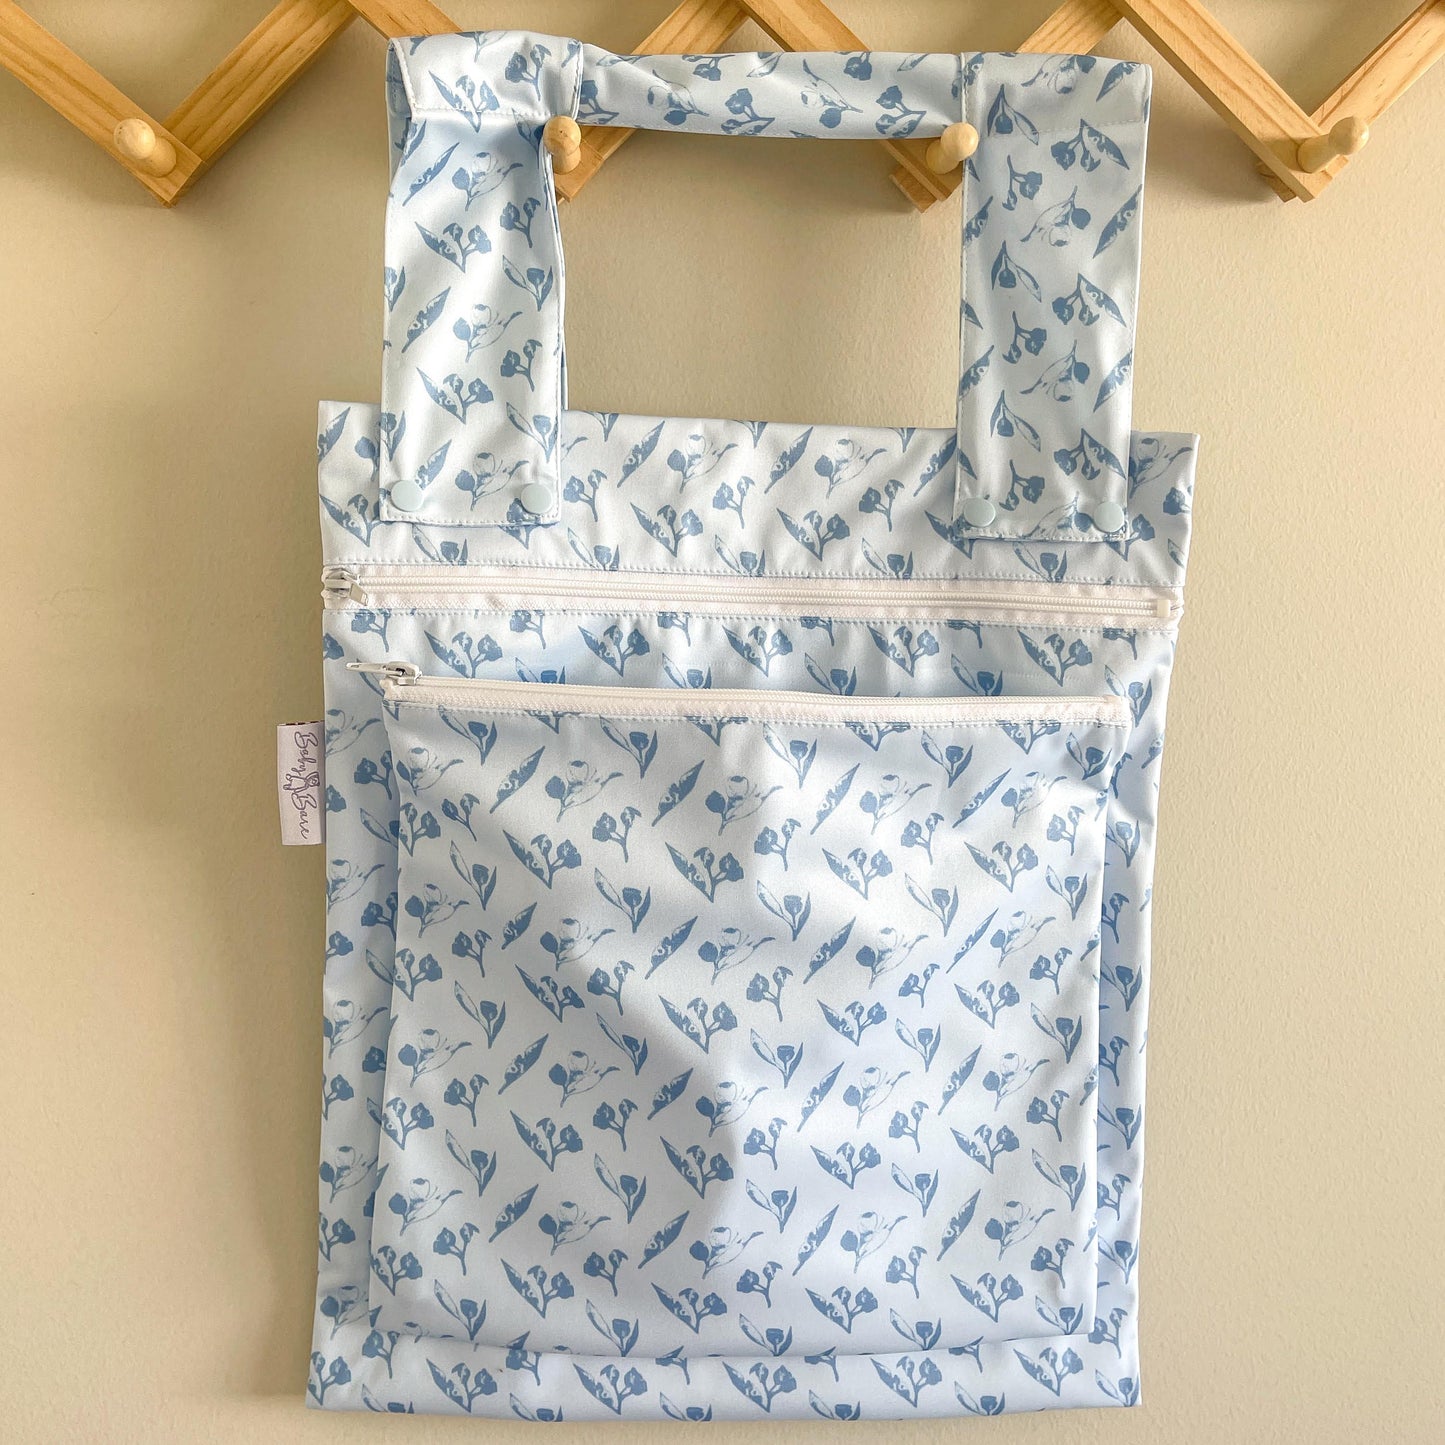 WET BAGS – Baby Bare Cloth Nappies